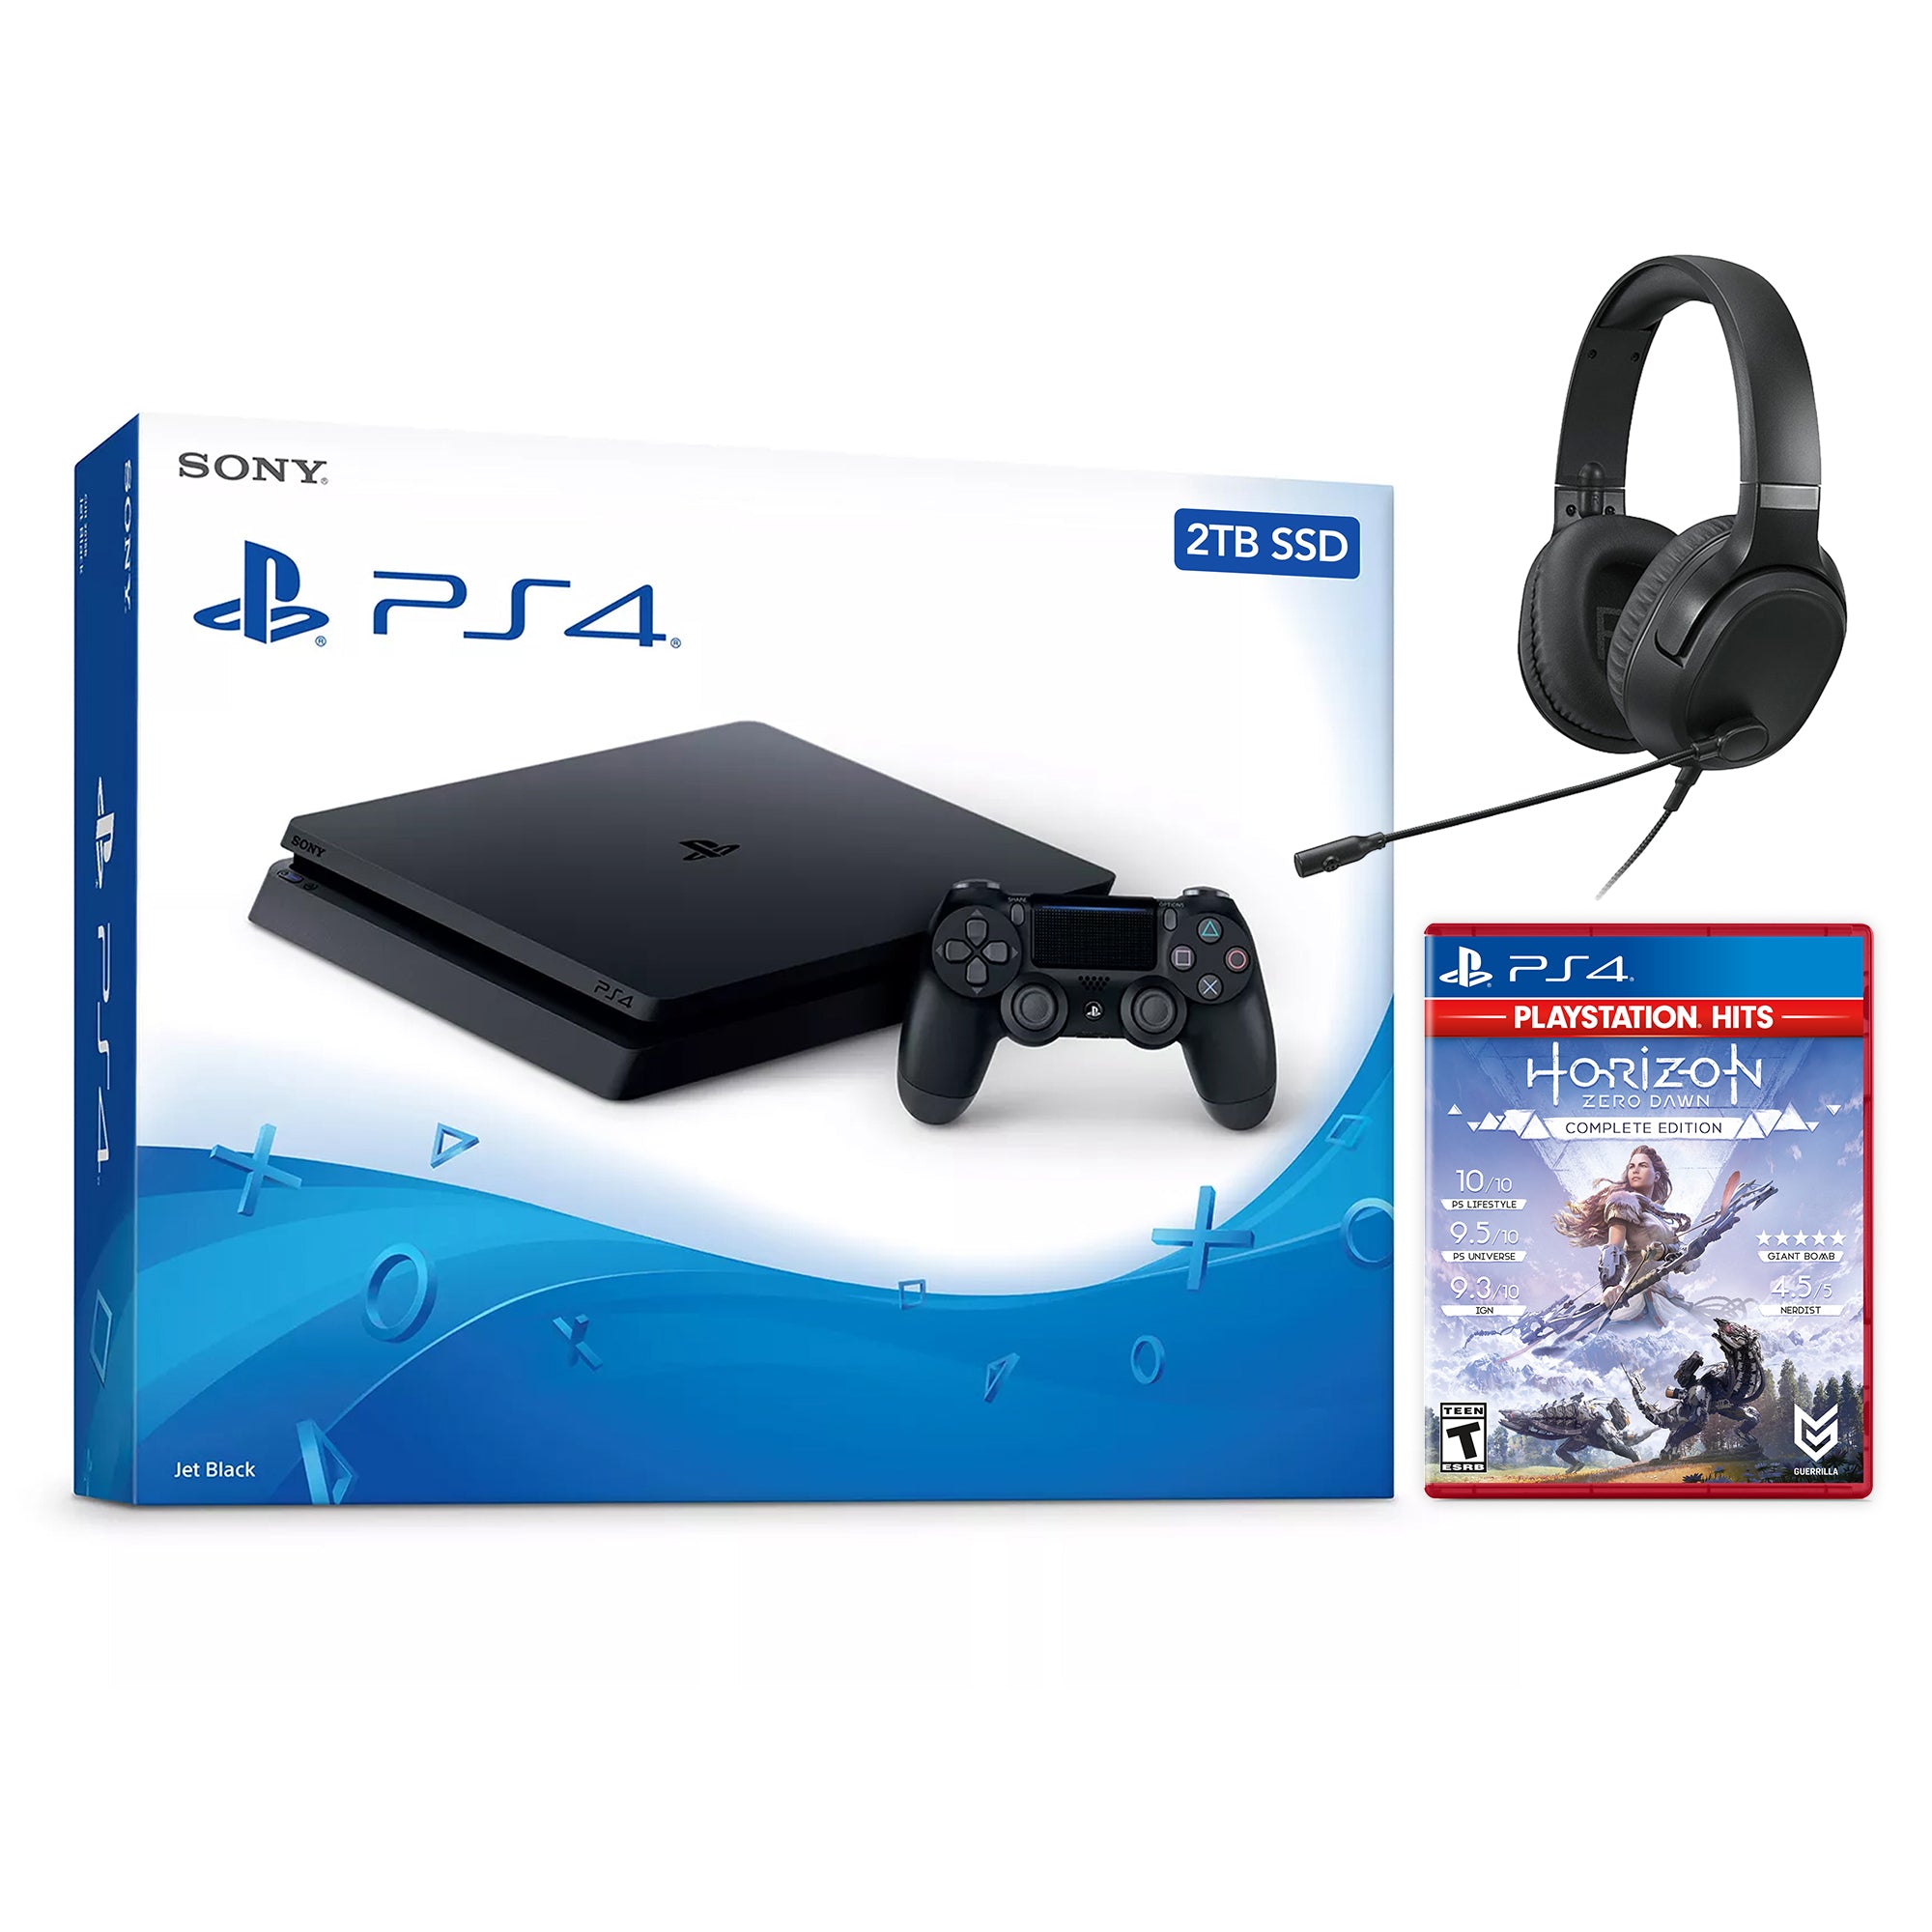 Sony PlayStation 4 Slim Call of Duty Vanguard Bundle Upgrade 2TB SSD PS4 Gaming Console, Jet Black, with Mytrix Chat Headset - 2TB Internal Fast Solid State Drive Enhanced PS4 Console